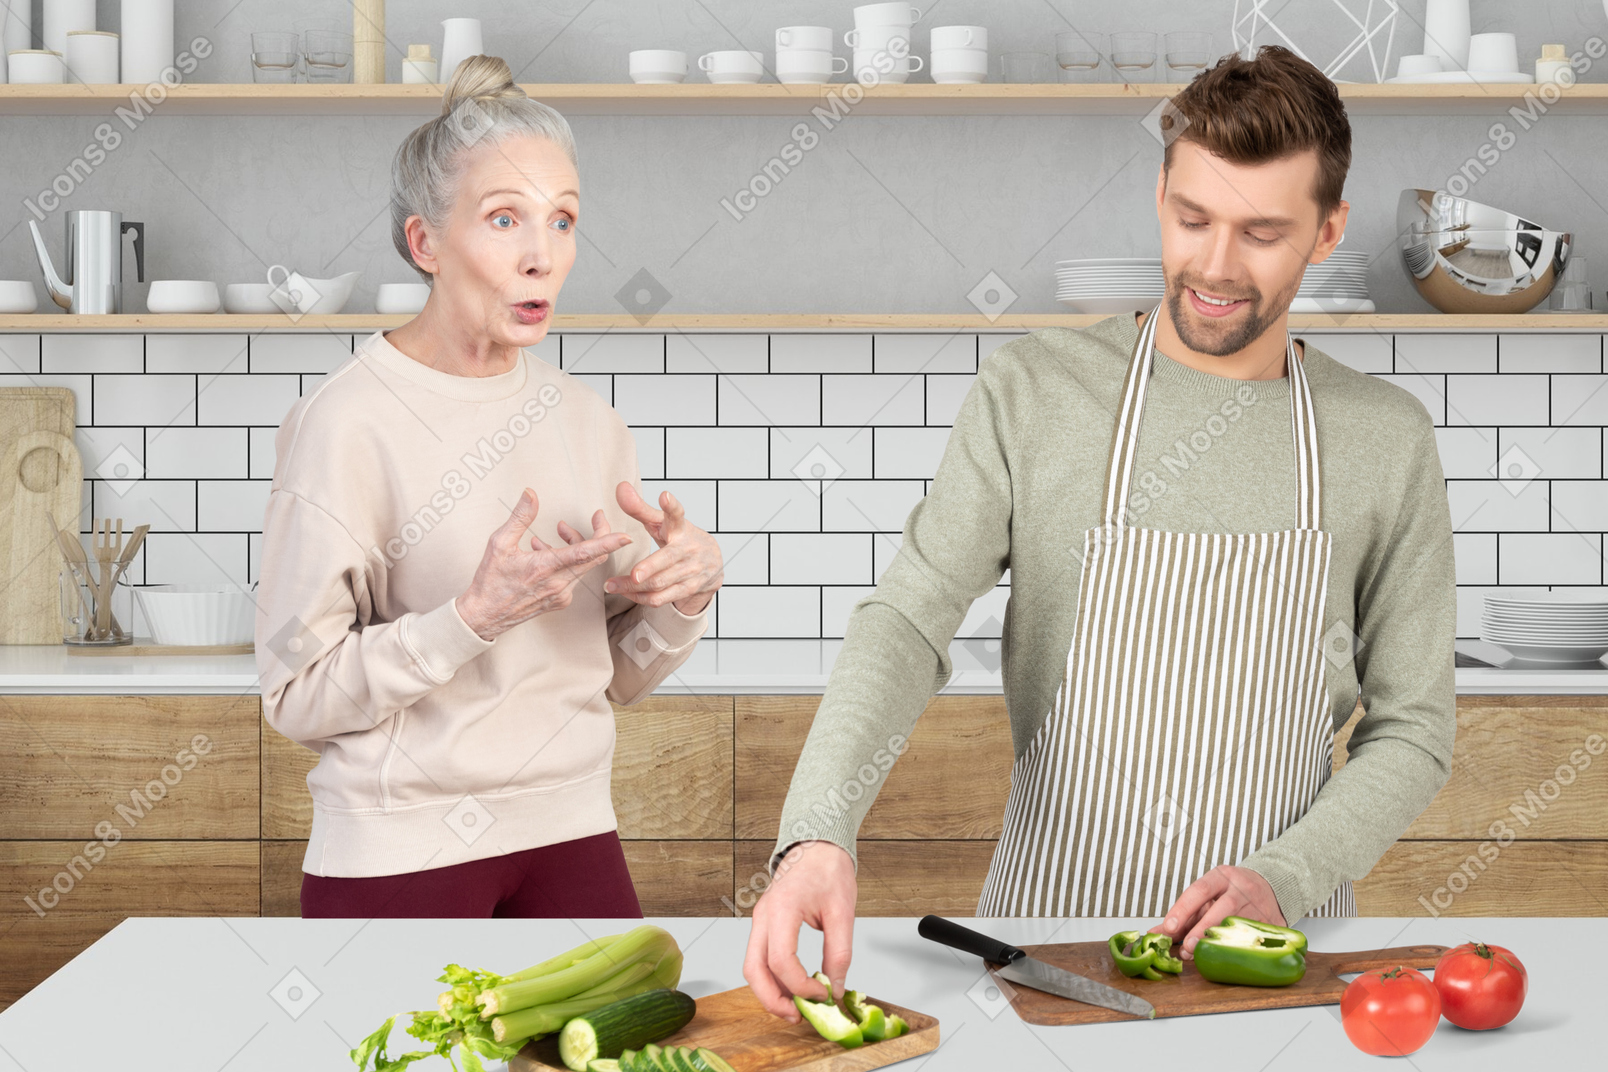 A man preparing food and standing next to a shocked looking older woman